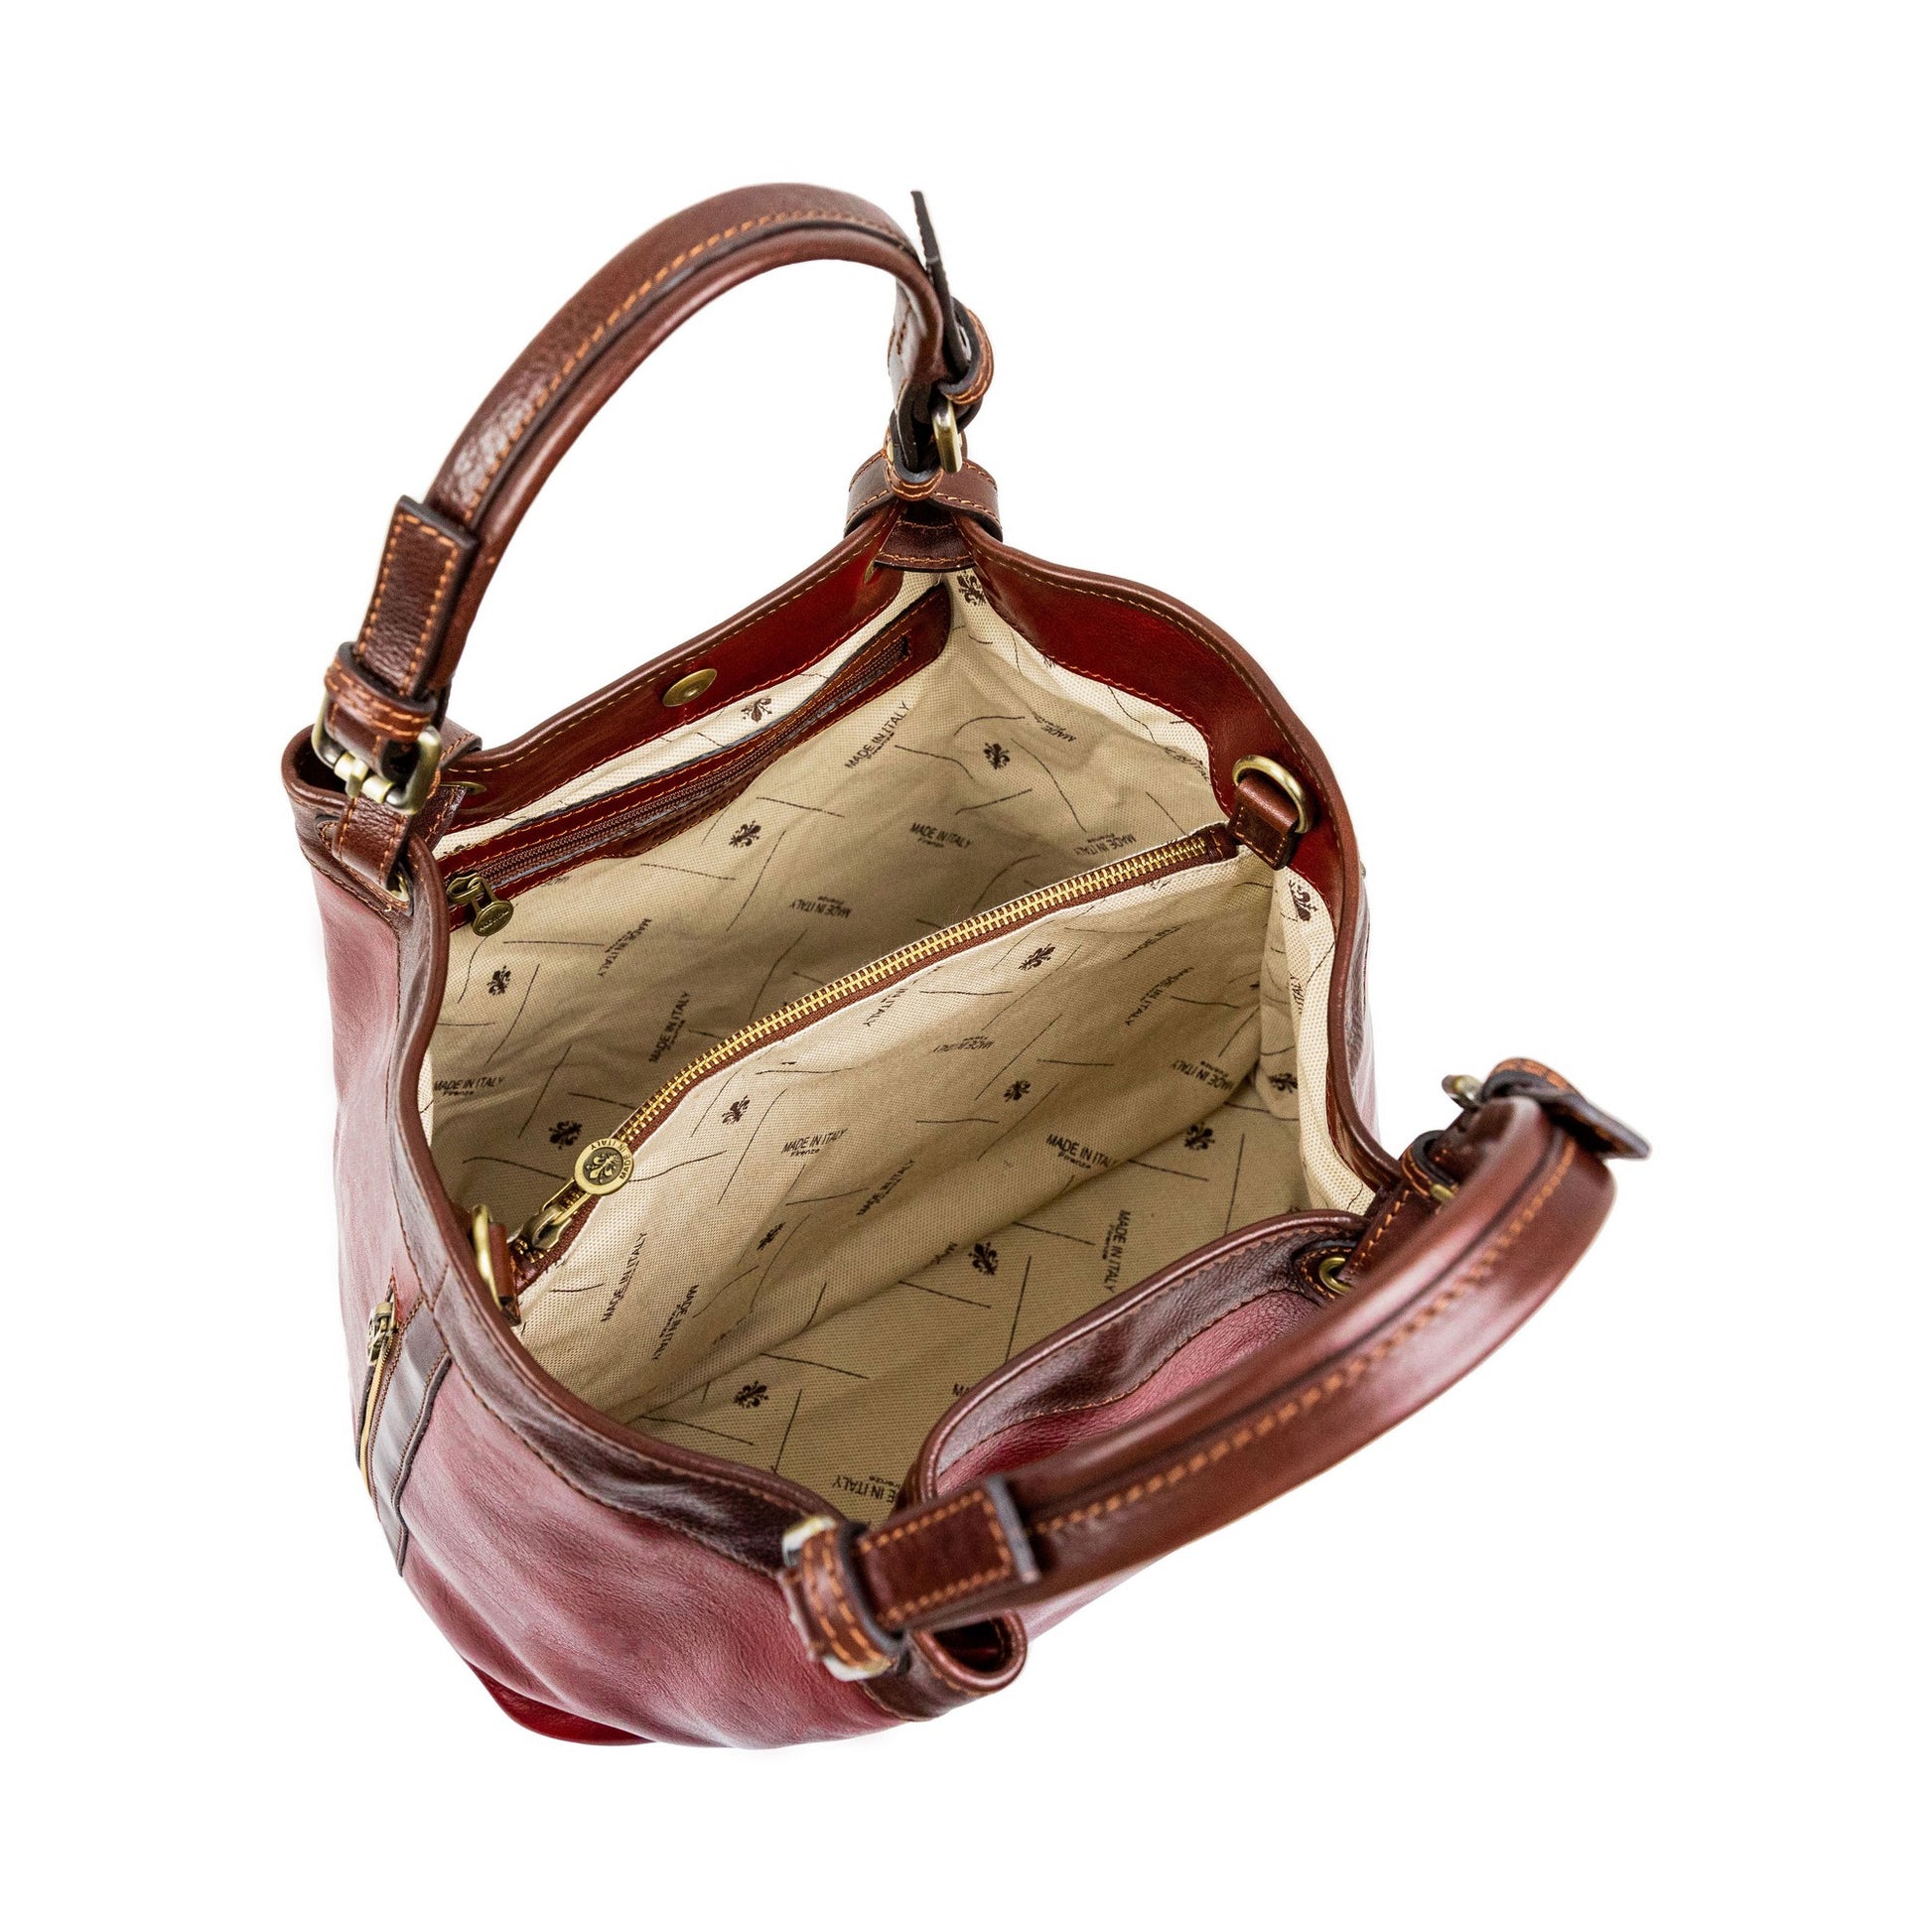 Leather Handbag - The Betrothed For Women Time Resistance   